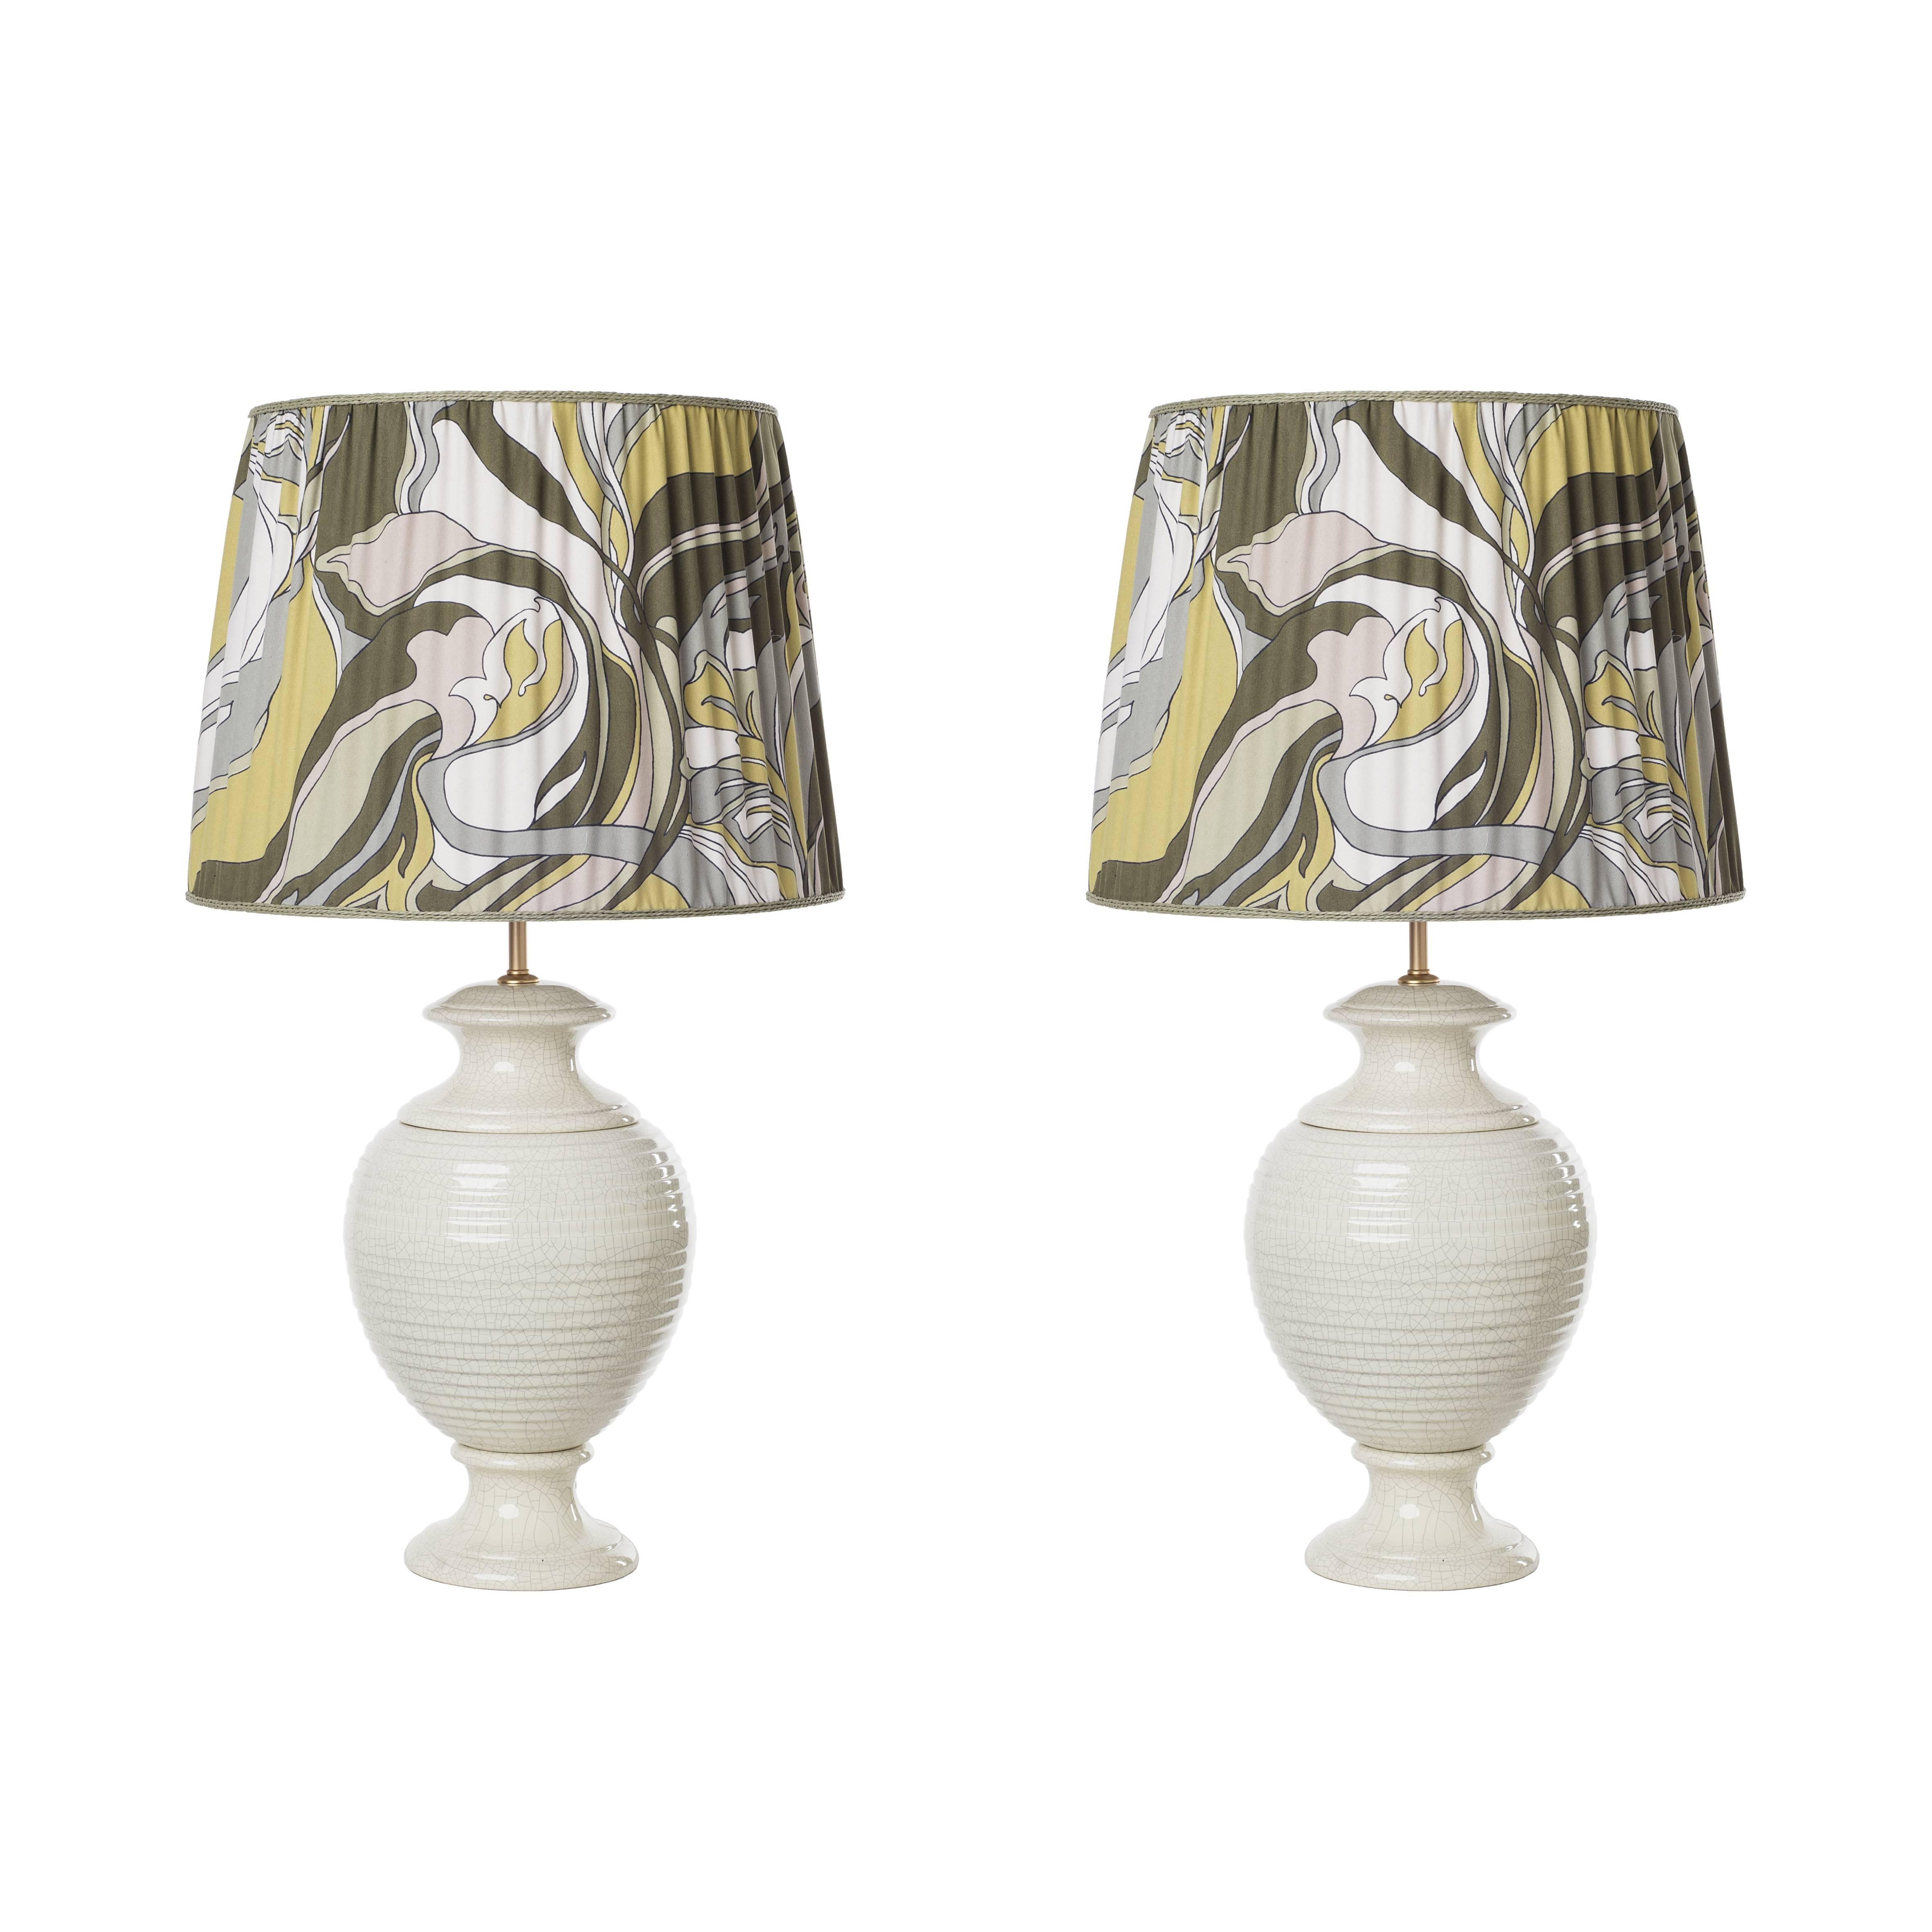 Pair of Striped Ceramic Table Lamps For Sale